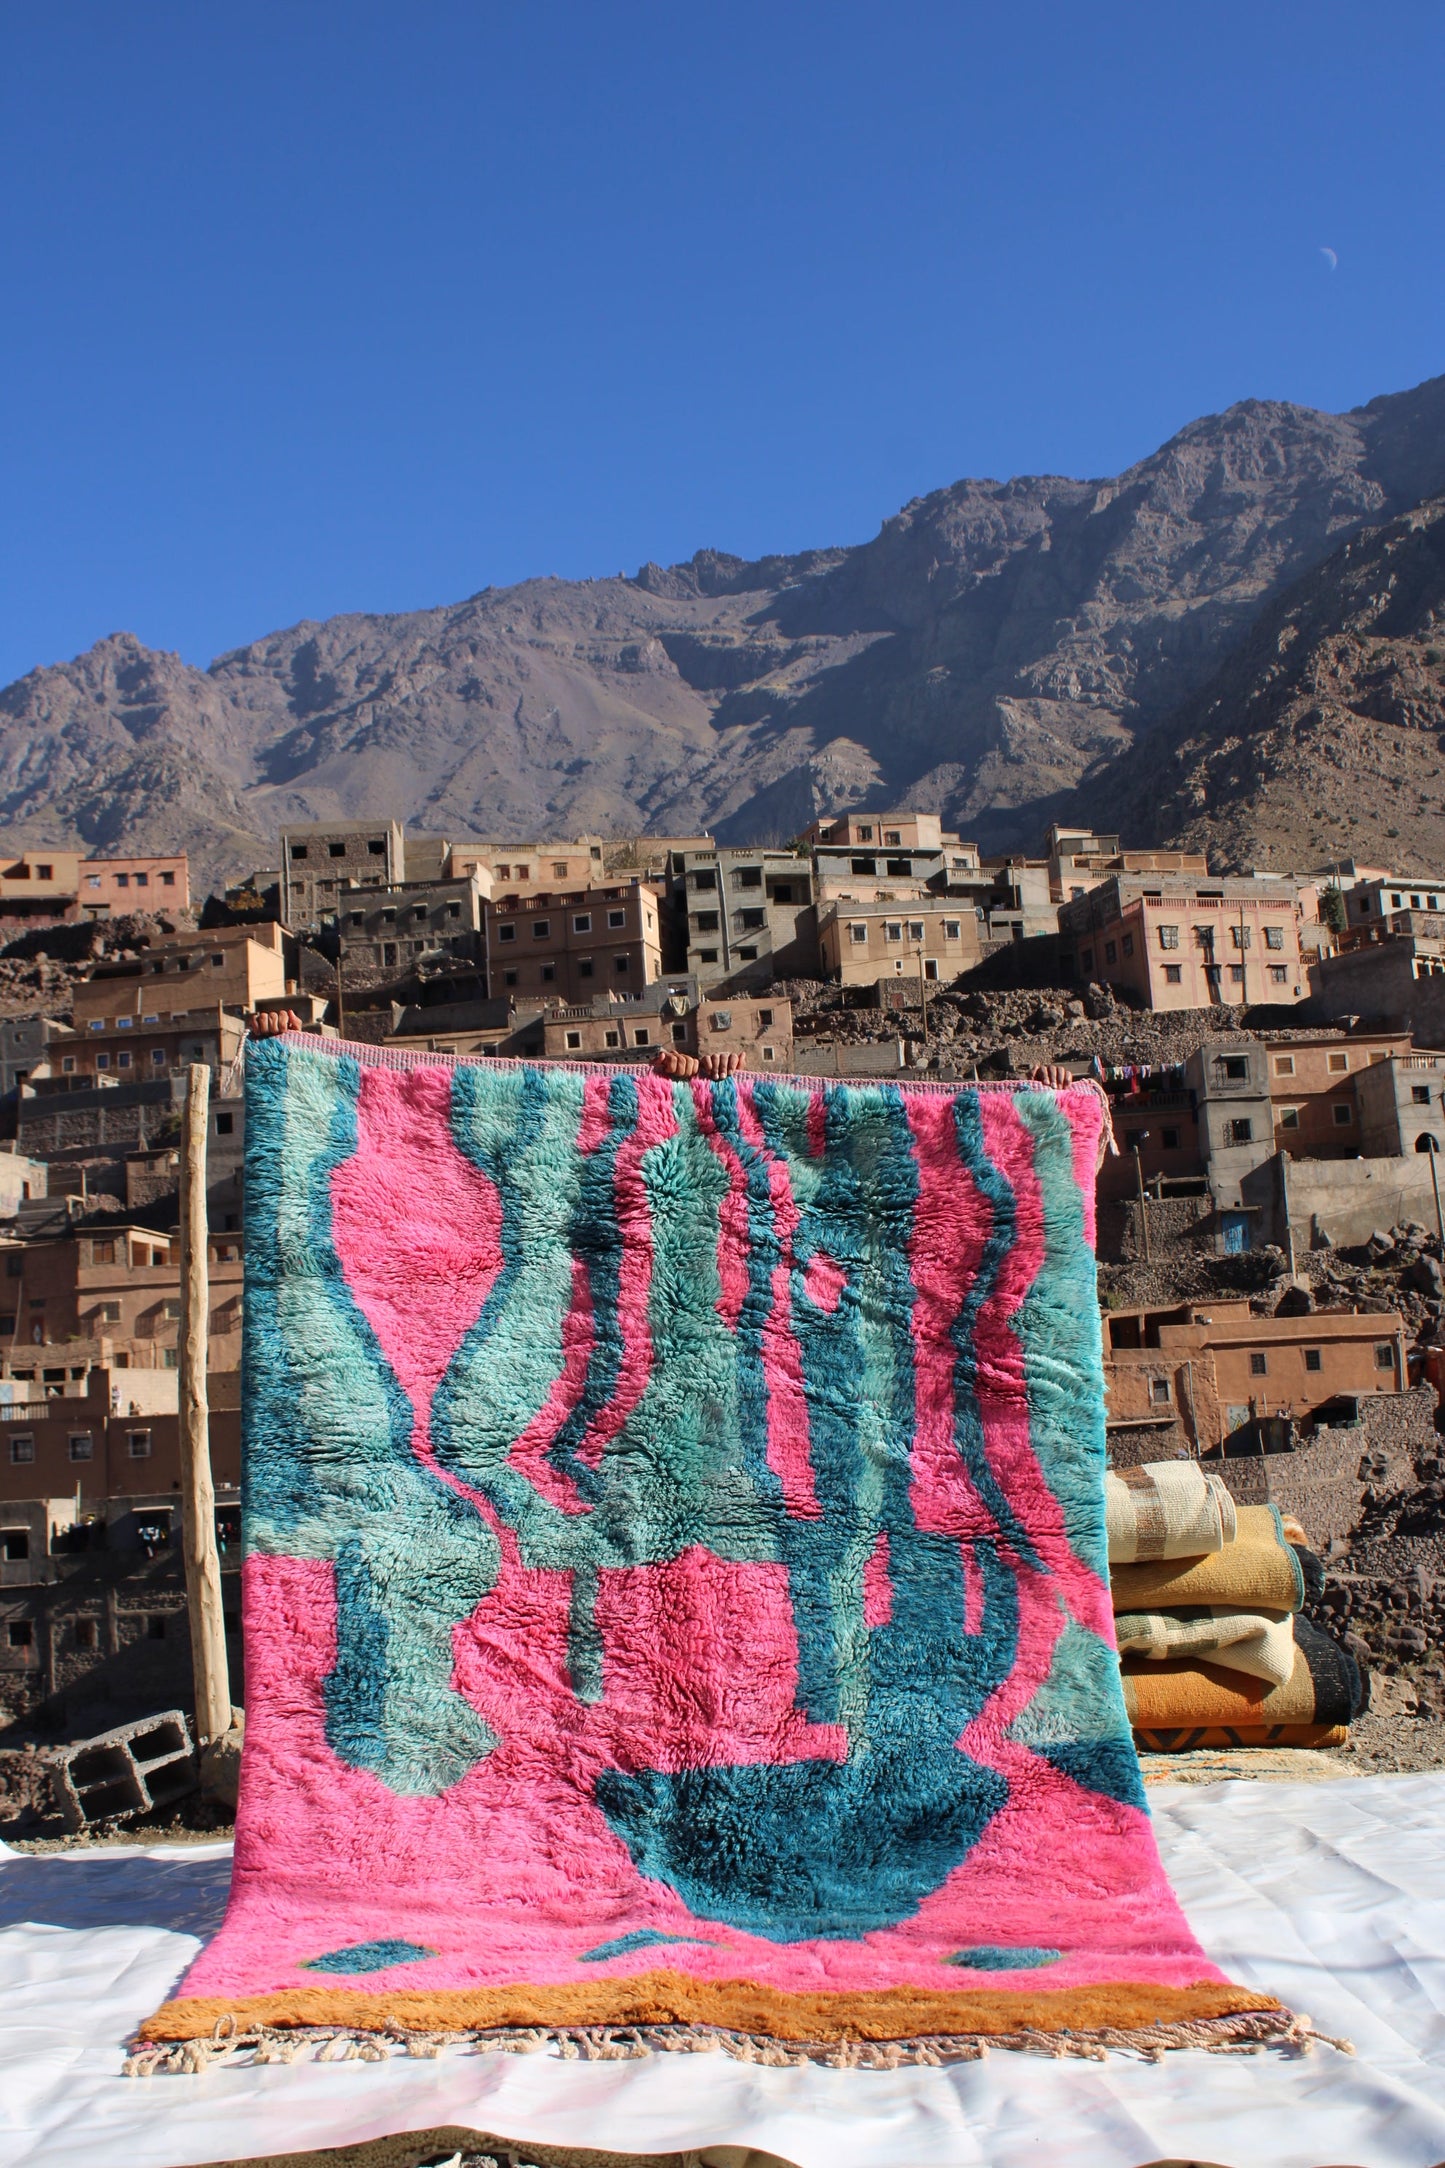 Beni Ourain rugs originate from the Atlas Mountains of Morocco and are characterized by their distinctive, neutral-toned, and geometric designs. These handwoven rugs often feature a plush pile and are made by the Berber tribes,  size is 263x177 cm